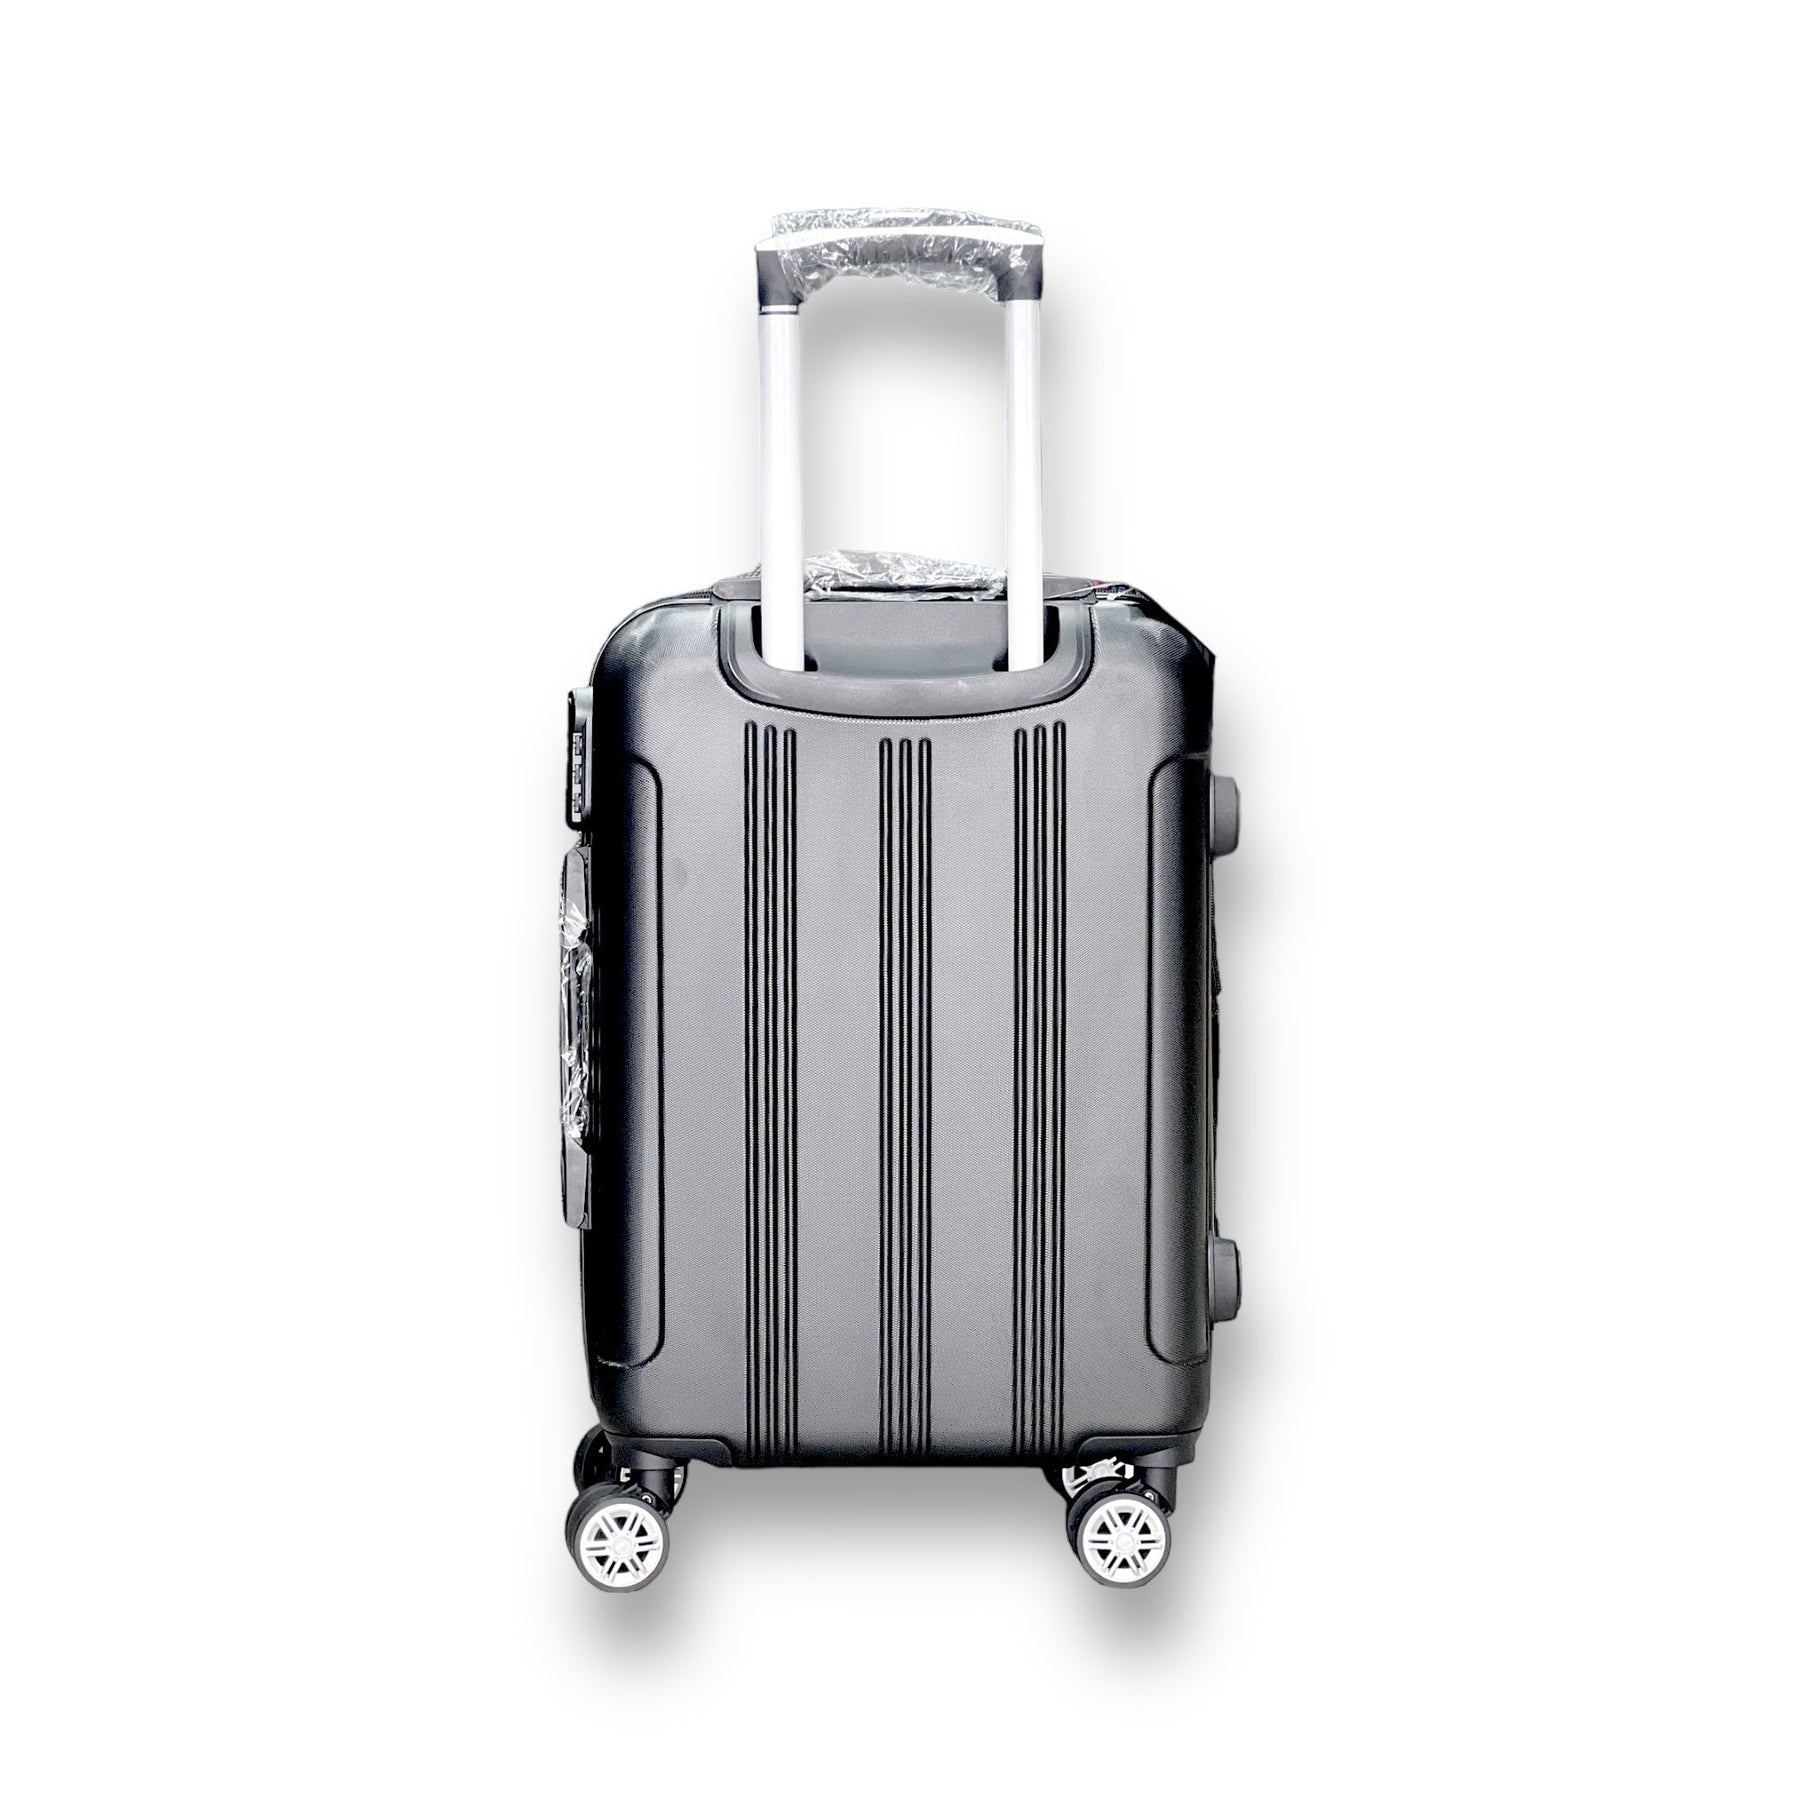 Fast Road Hardside Expandable Roller Luggage Sky Black, Carry-on 20 inch